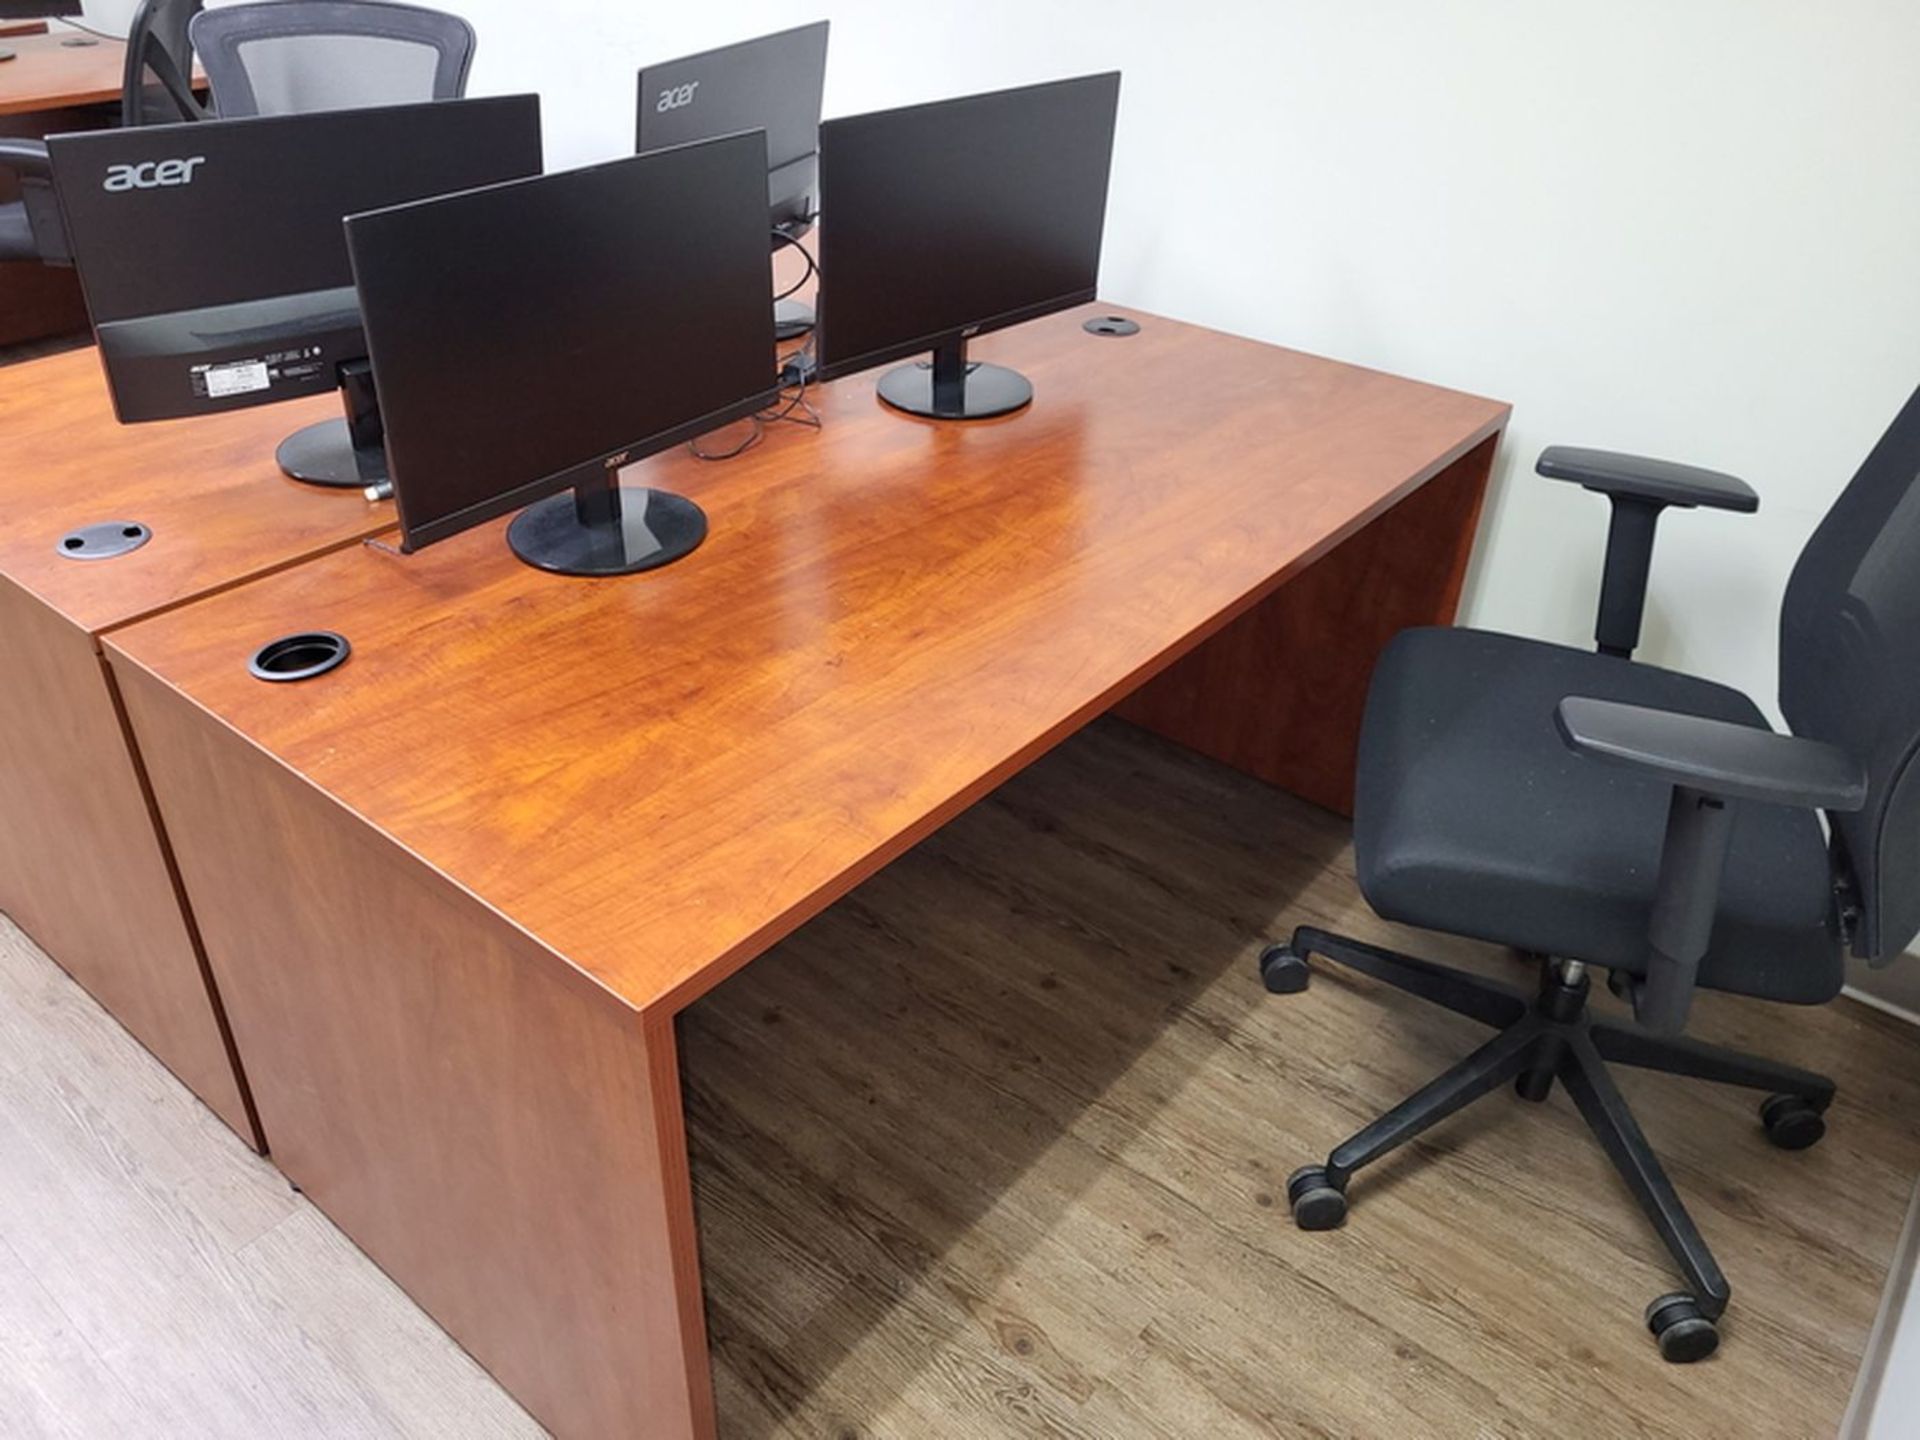 Lot - Office Furnishings; to Include: (2) Wood Office Desks, (2) Monitor Stands with Acer - Image 3 of 3